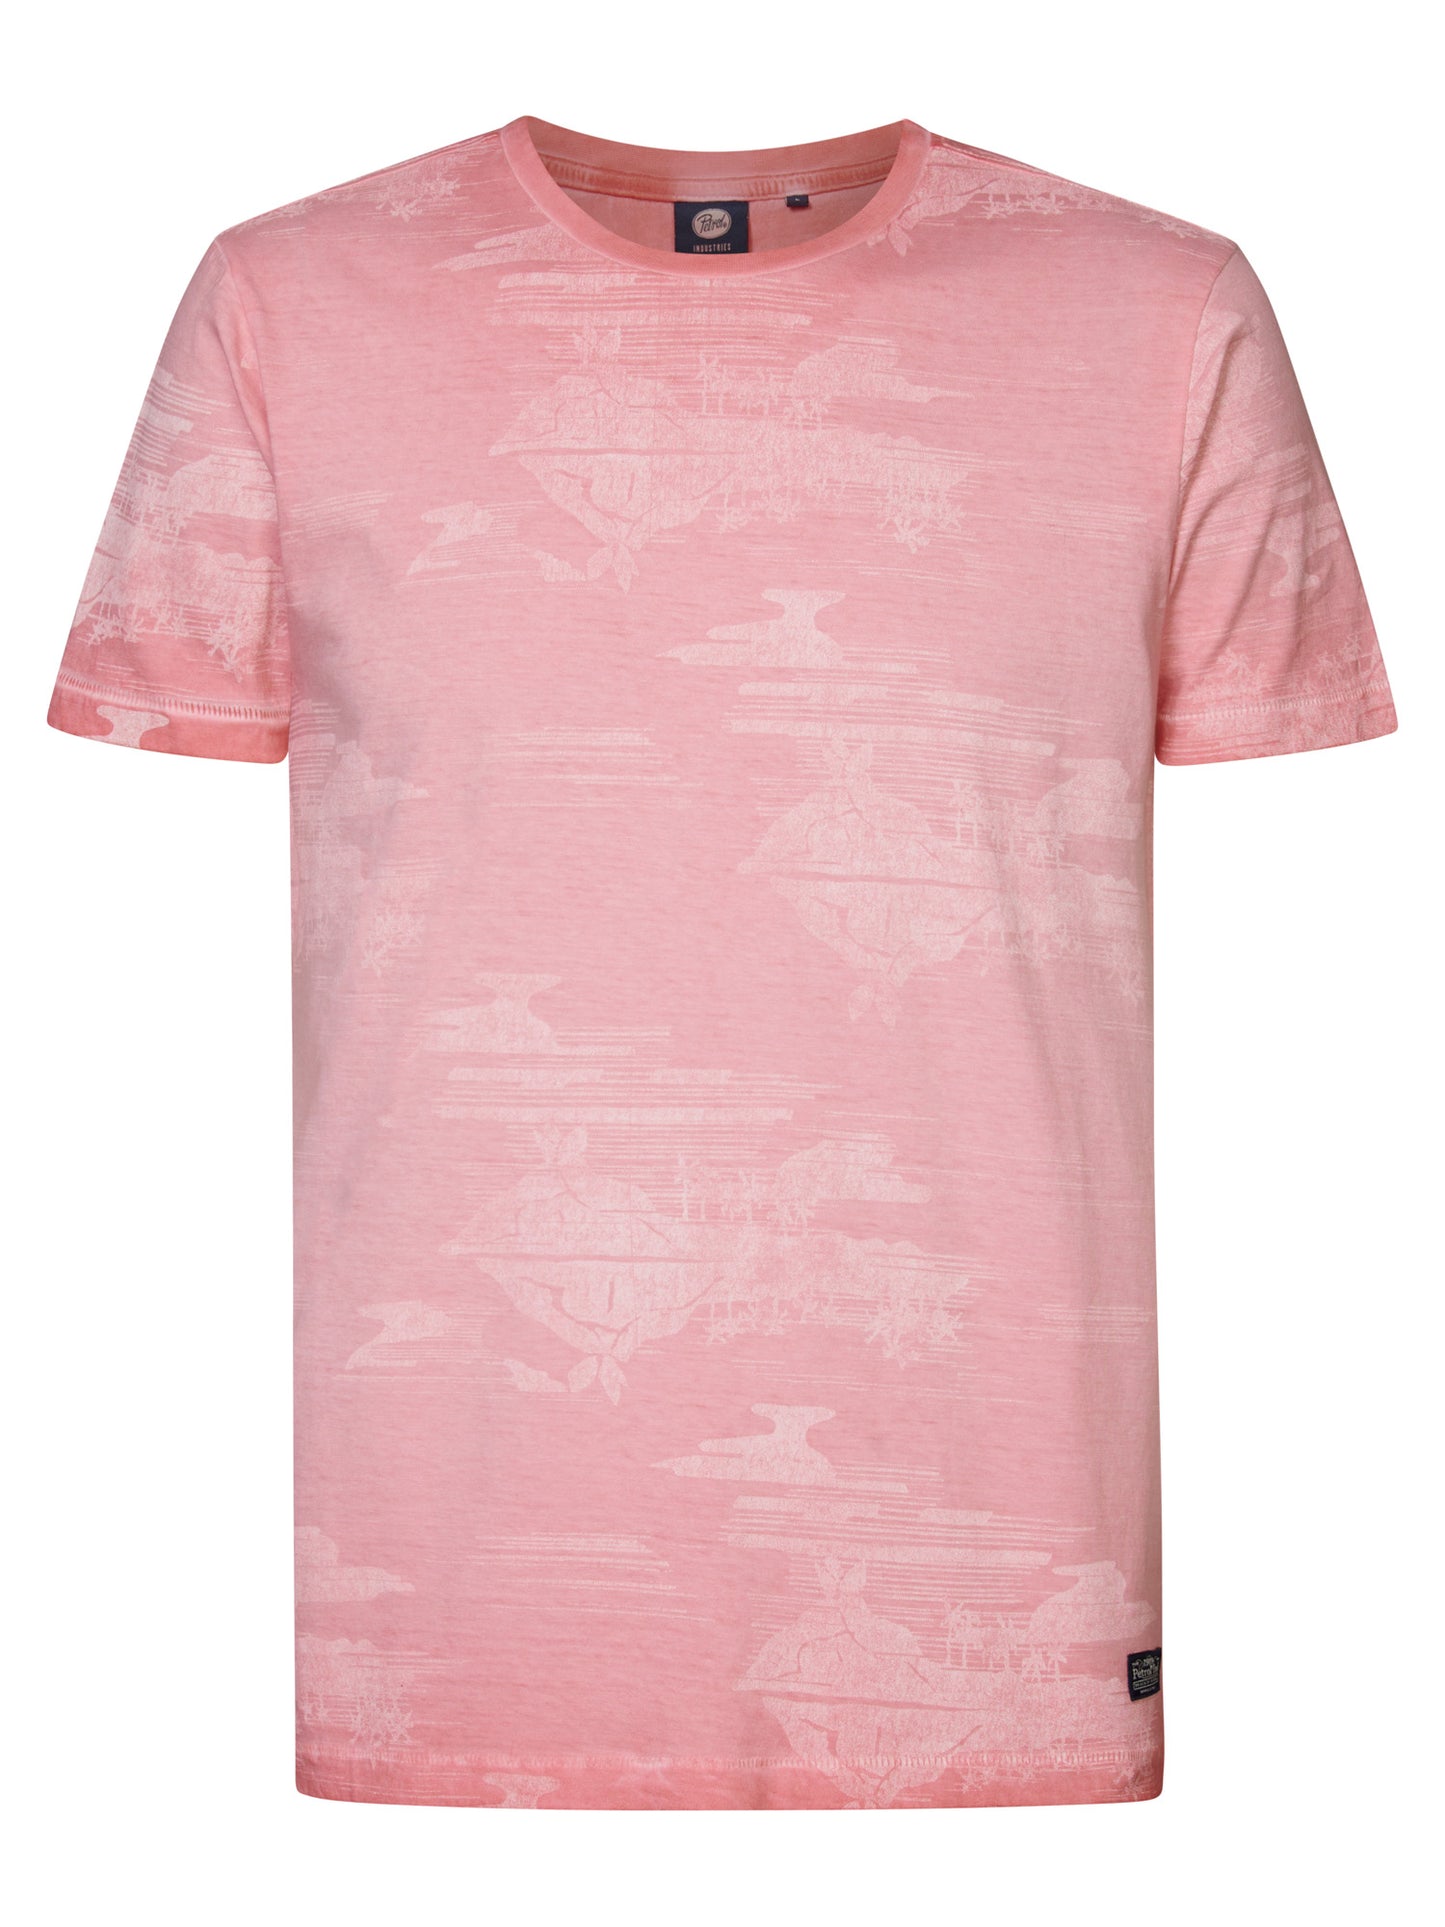 ALL-OVER PRINT T-SHIRT